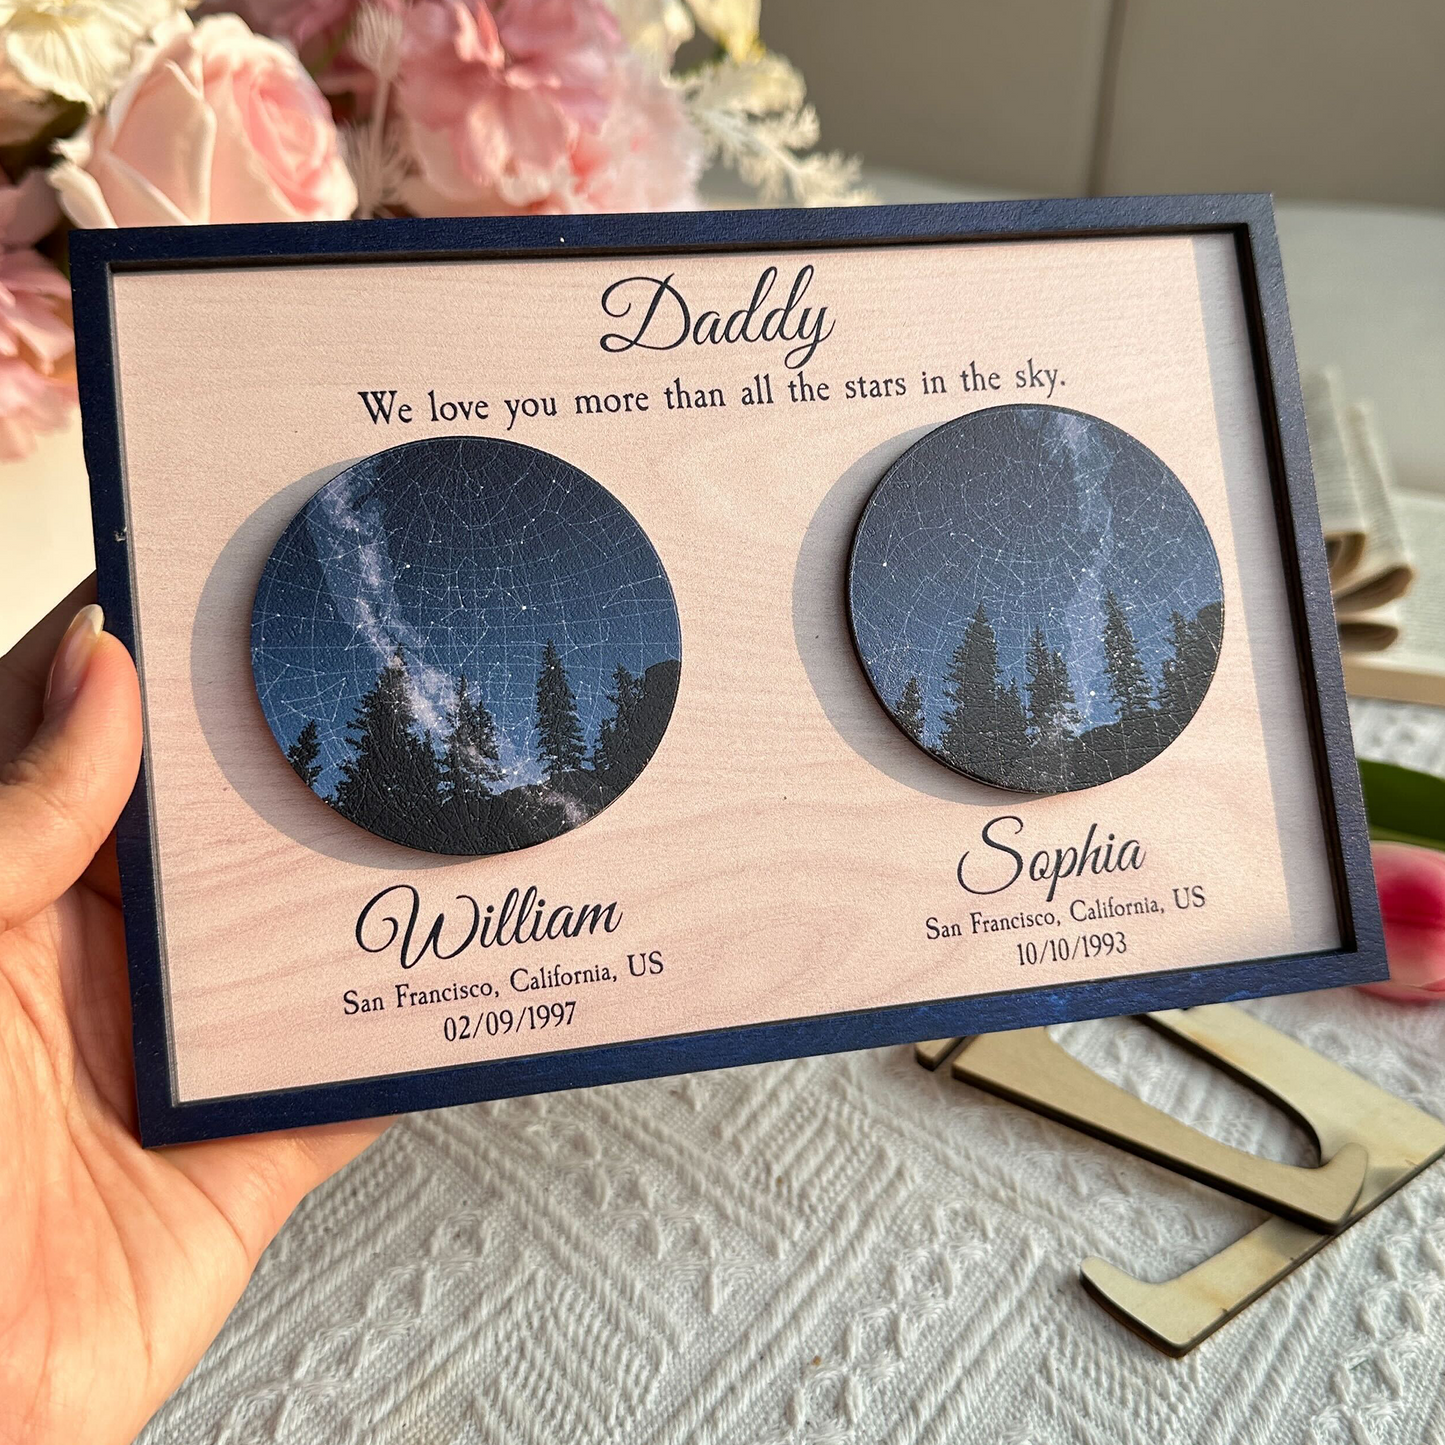 We Love You More Than All The Stars In The Sky - Personalized 2 Layers Wooden Plaque